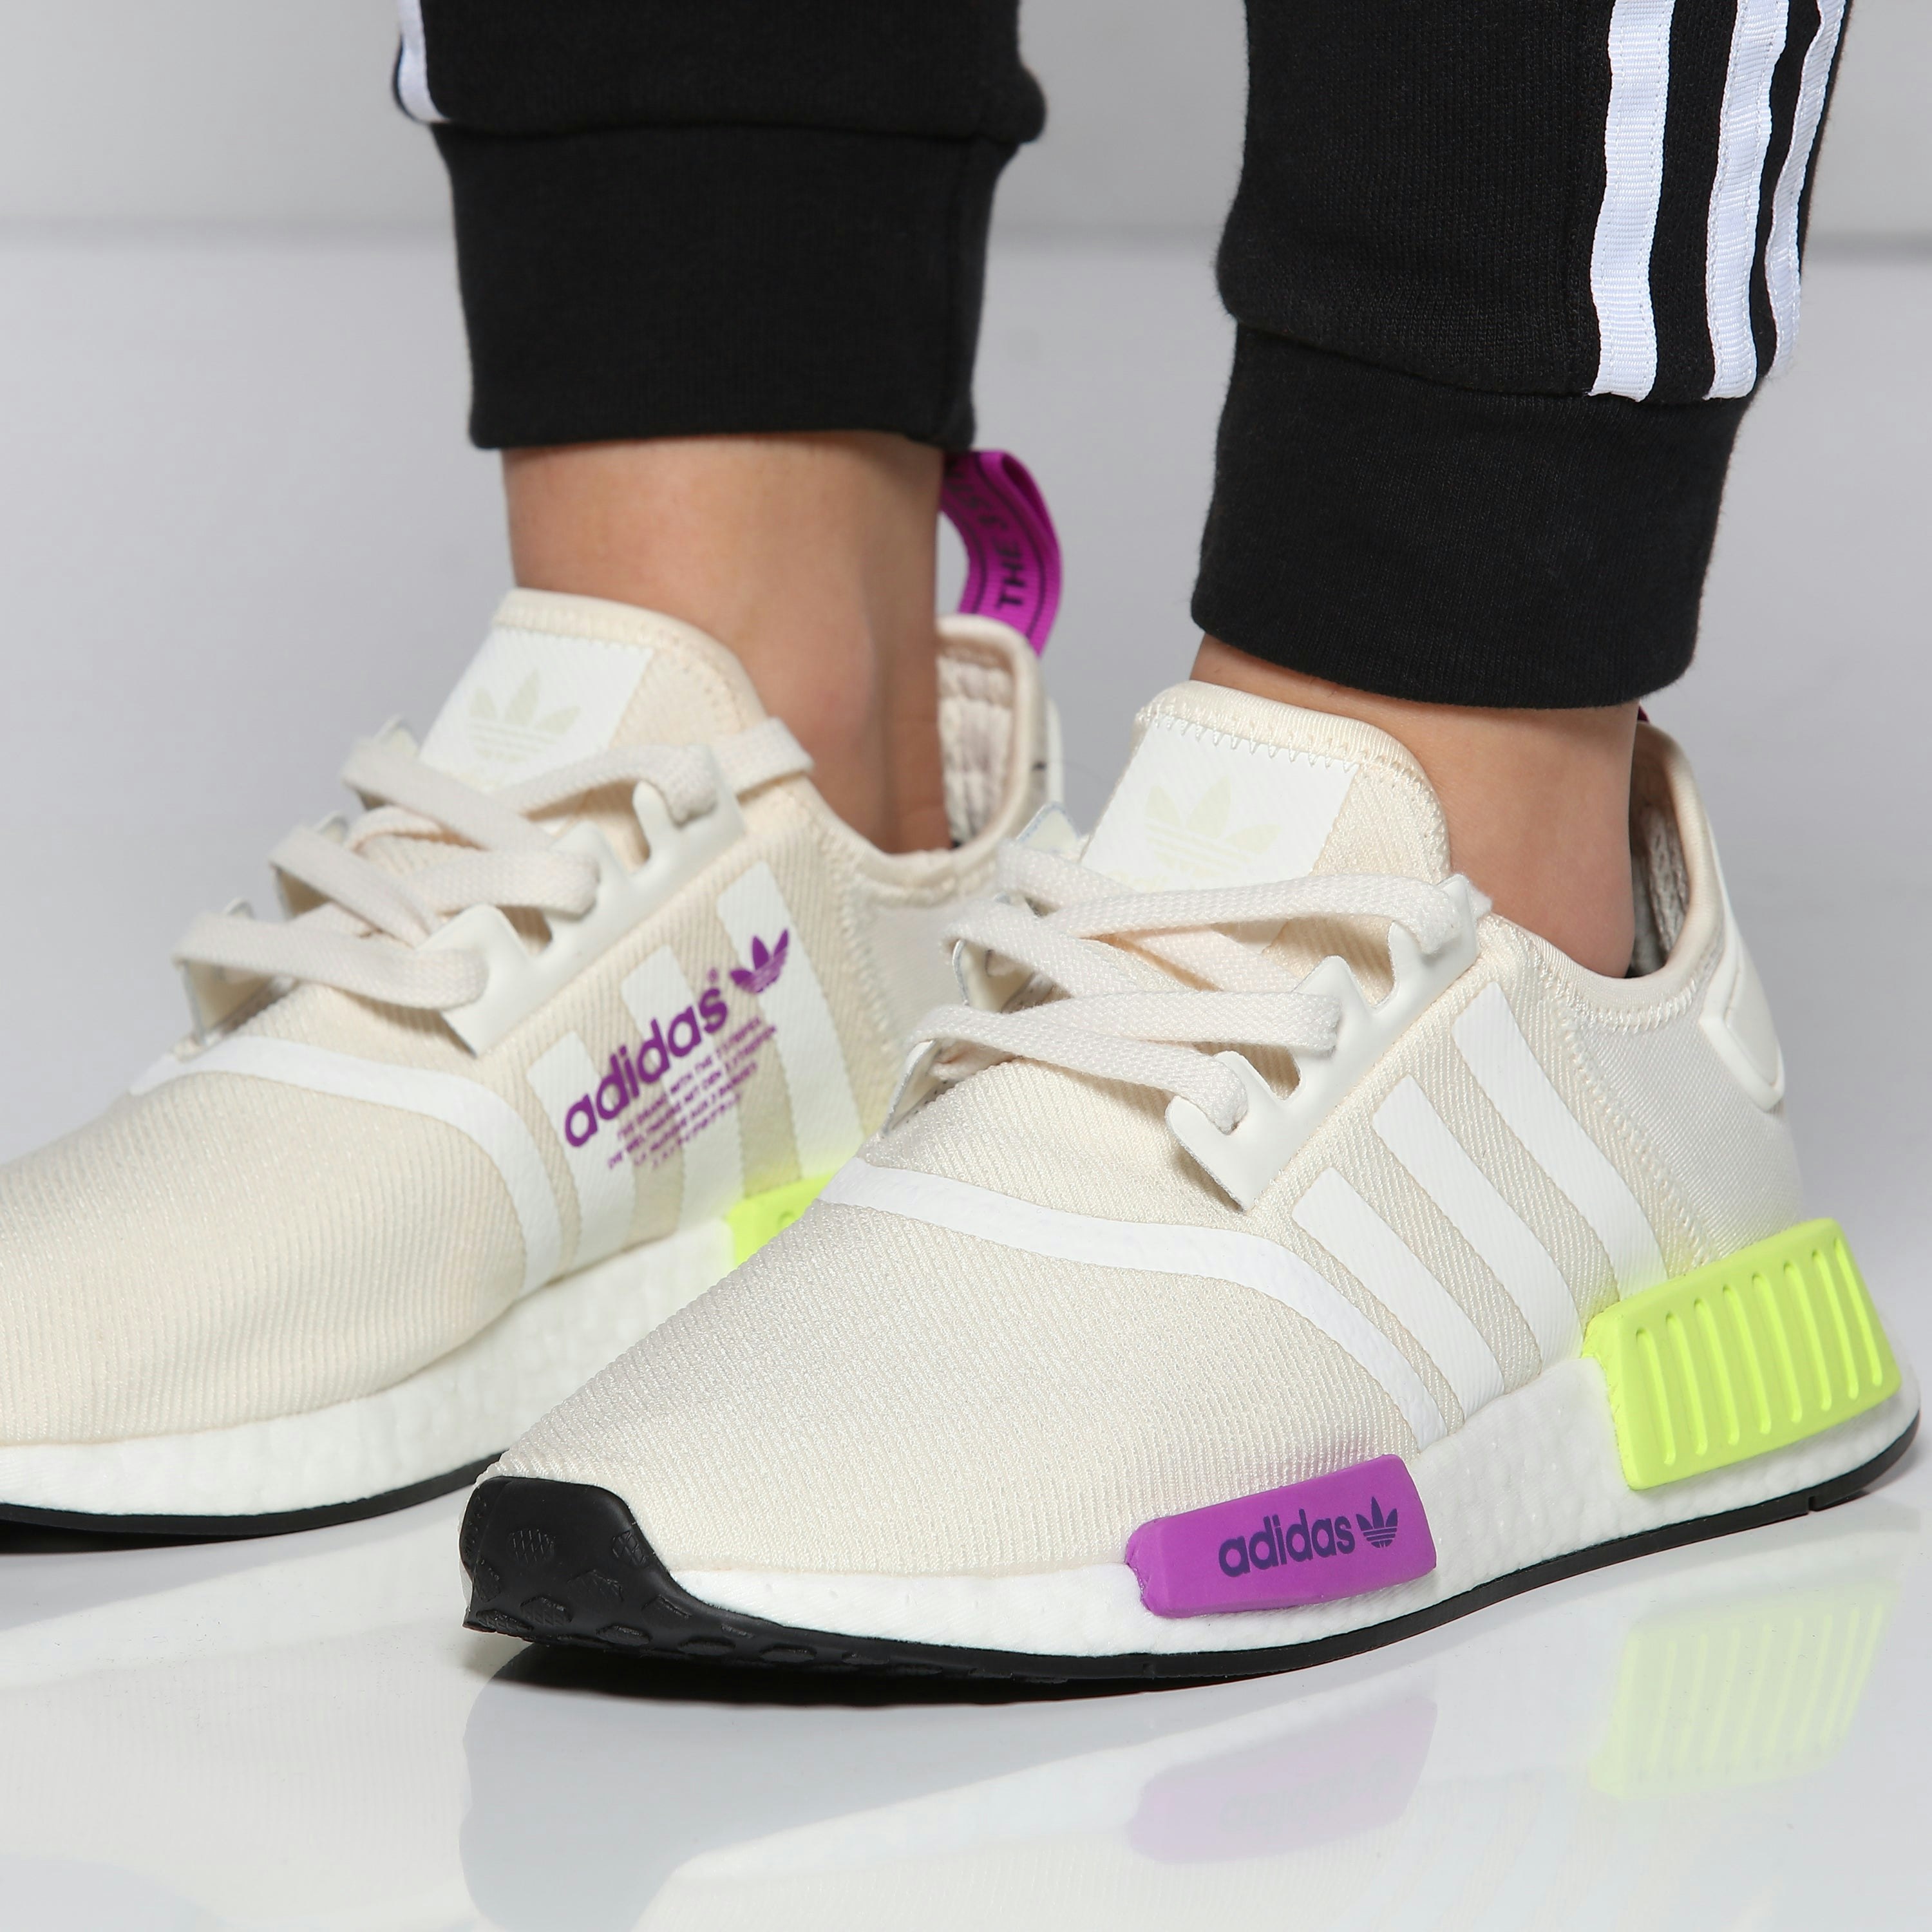 Adidas NMD R1 White Recommendation of Racquet and PTT Popularity 2020